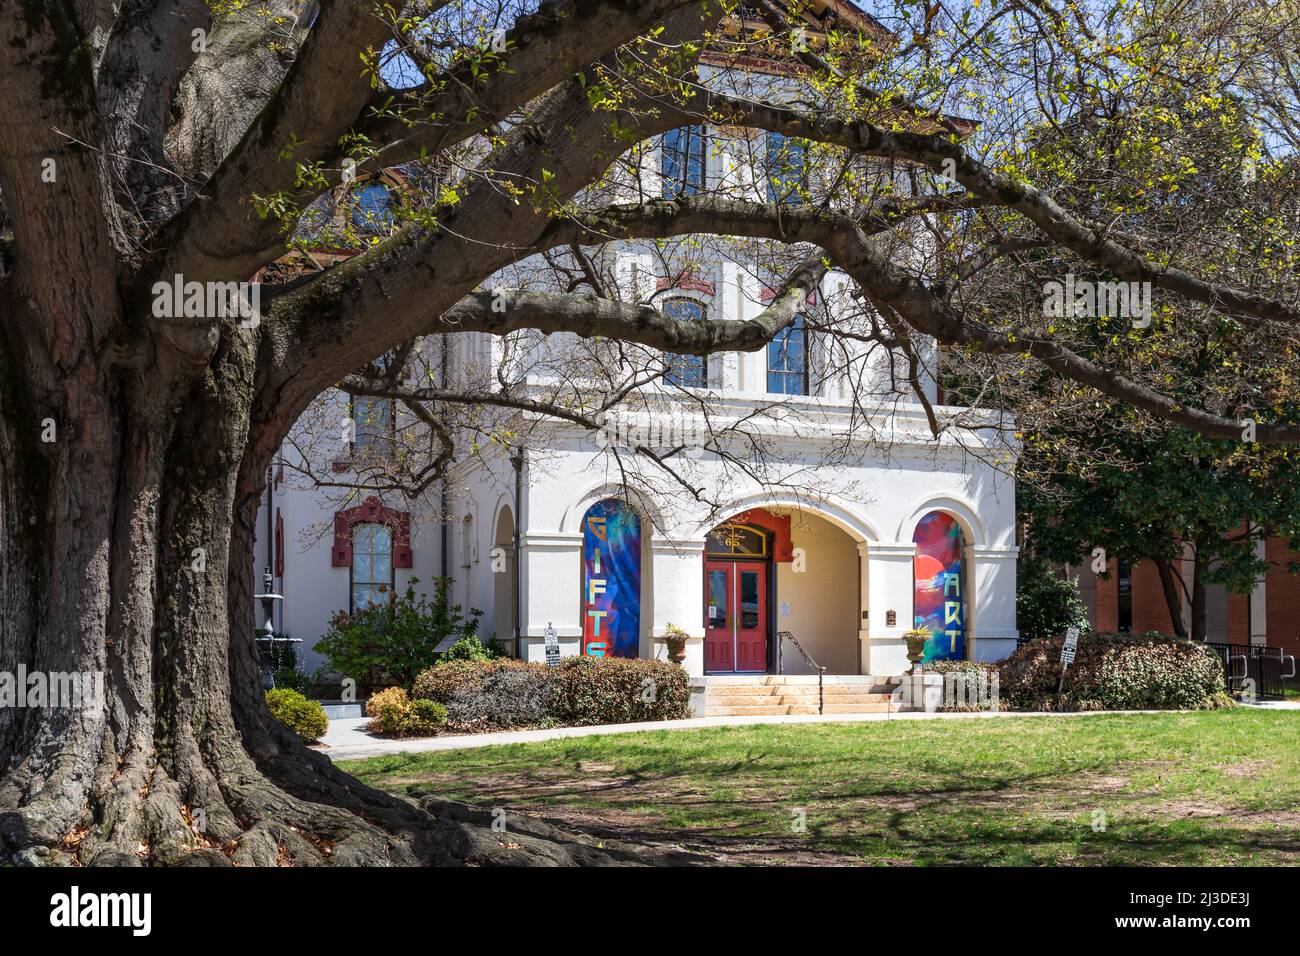 CONCORD, NC, USA-3 APRIL 2022: The Cabarrus Arts Council, theatre and galleries. Buidling entrance framed by ancient oak tree. Stock Photo